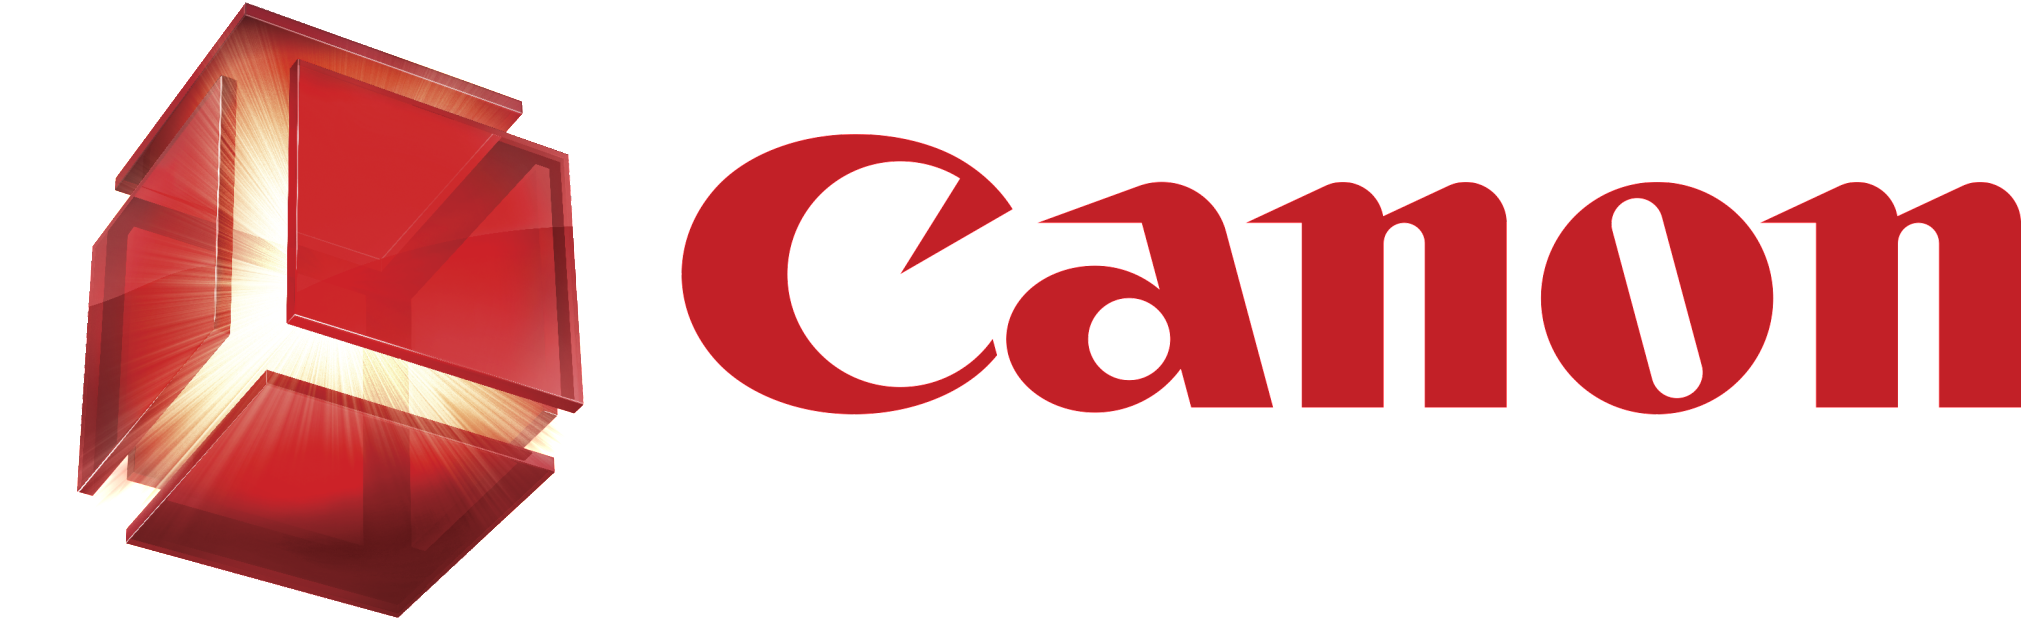 Canon Logo Png 2021 X 619